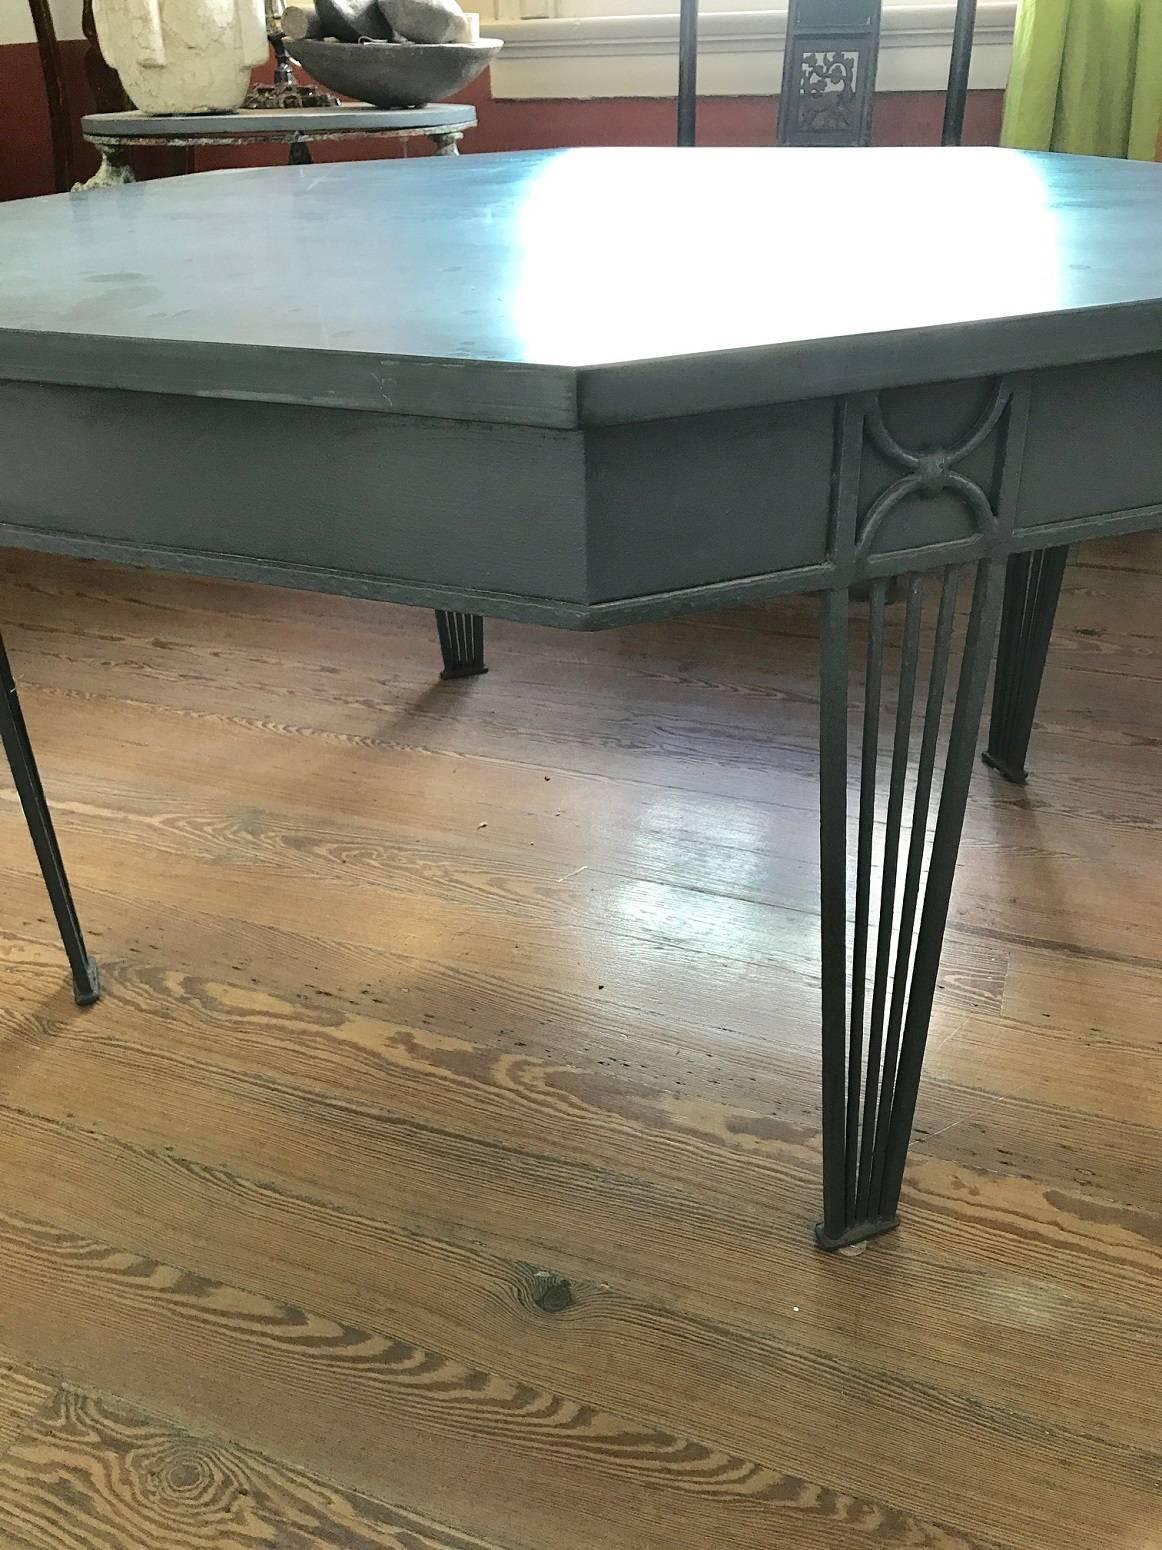 Impressive octagonal table of generous scale with painted iron base and thick slate top; can be used as a dining table, center table, or garden table; the iron painted slate blue to match the top; width measurement below is for flat side to flat